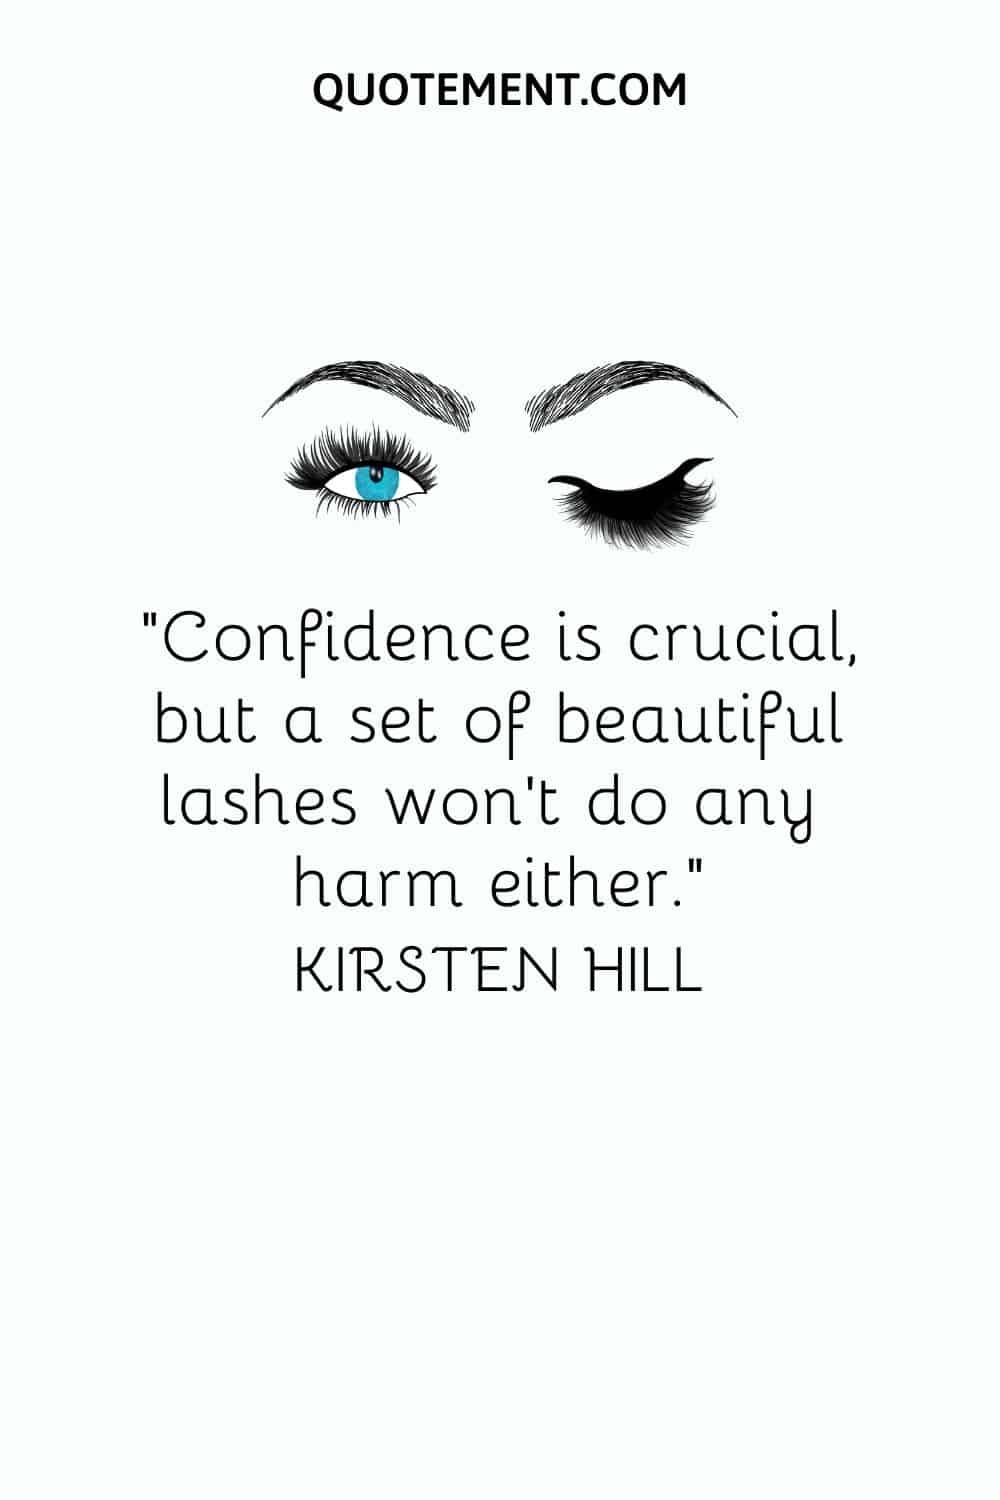 Confidence is crucial, but a set of beautiful lashes won’t do any harm either